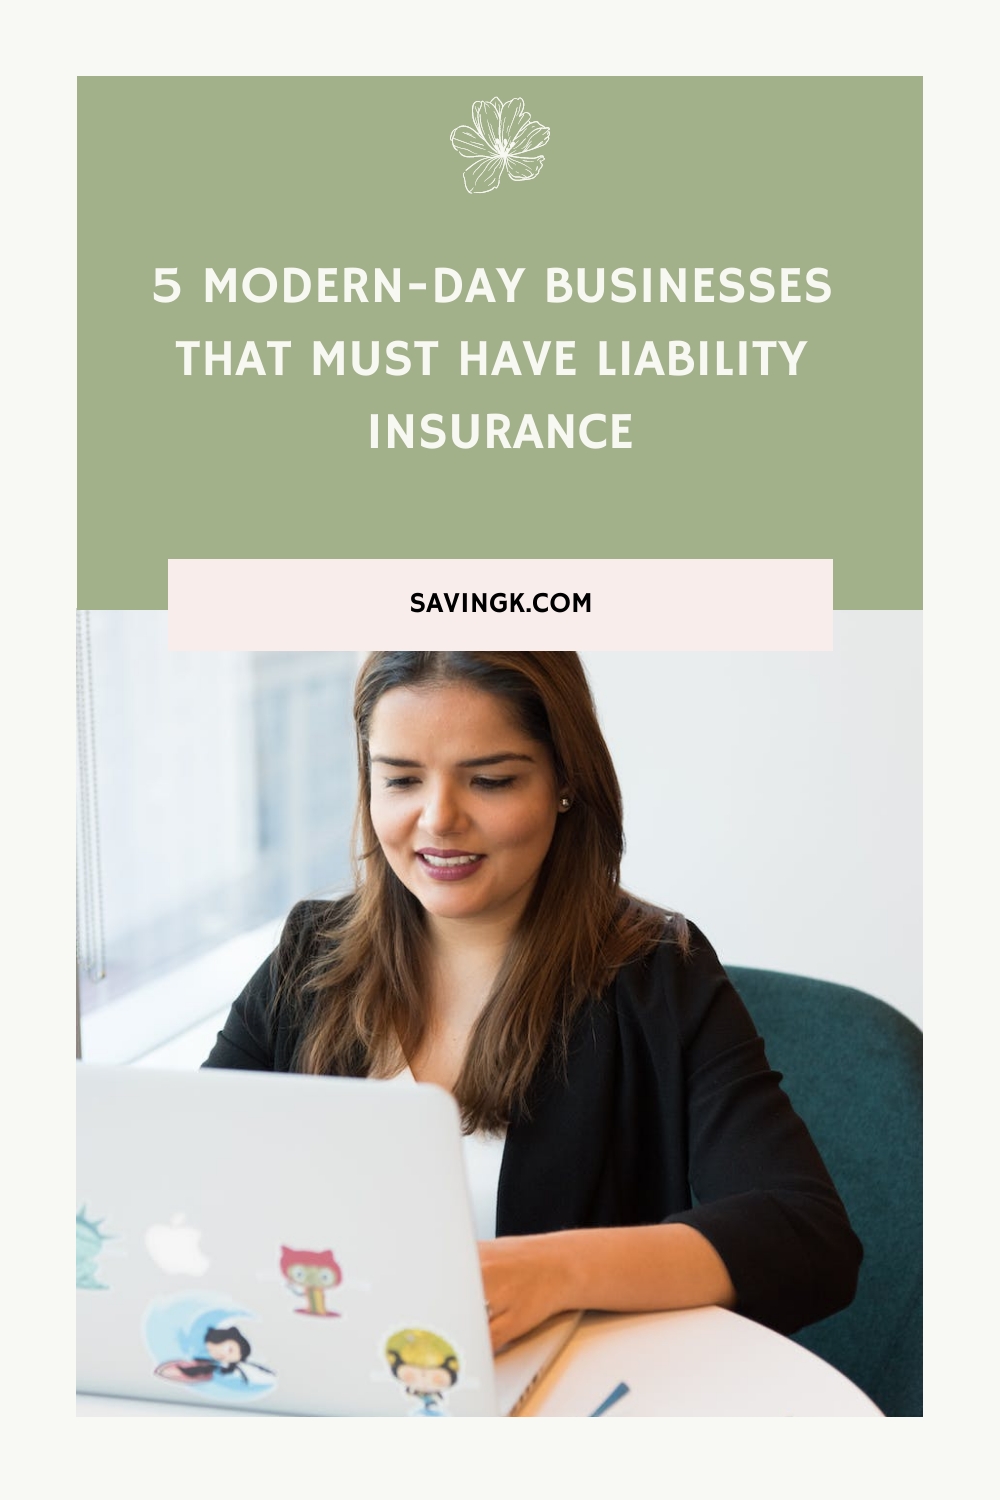 5 Modern-Day Businesses That Must Have Liability Insurance